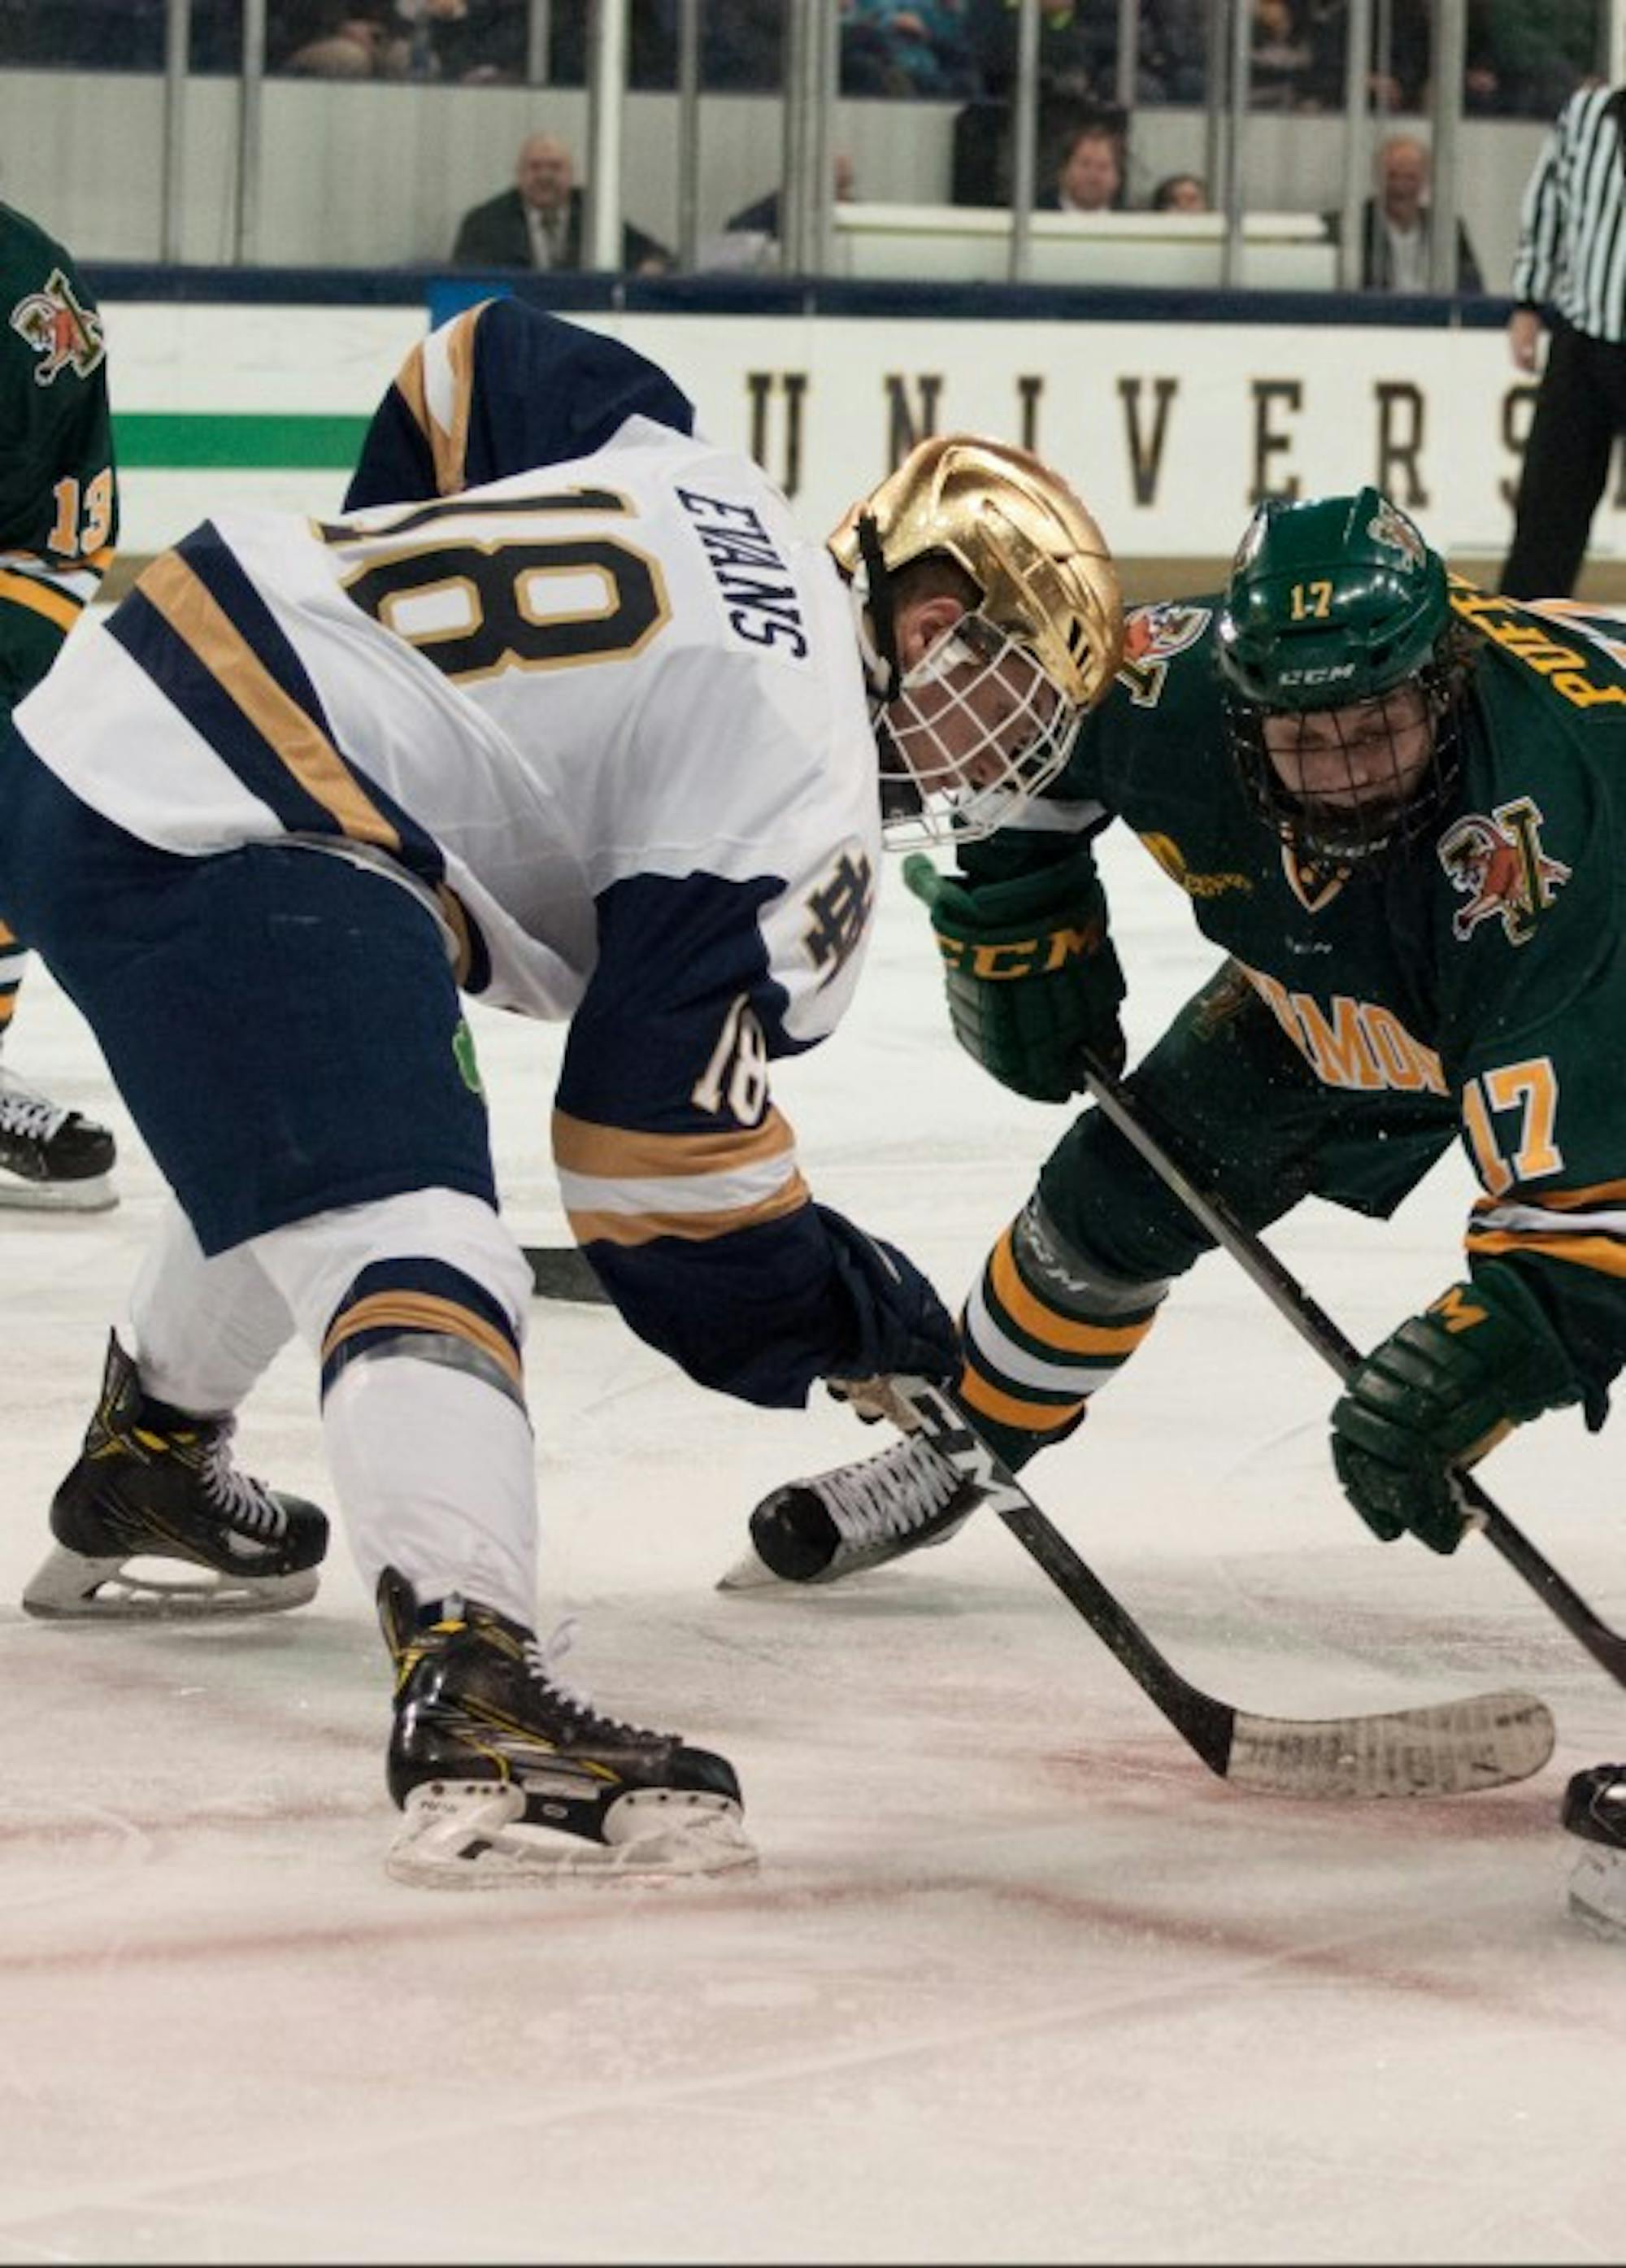 Irish junior forward Jake Evans squares up for a faceoff during Notre Dame's 4-4 tie with Vermont on Feb. 3 at Compton Family Ice Arena.